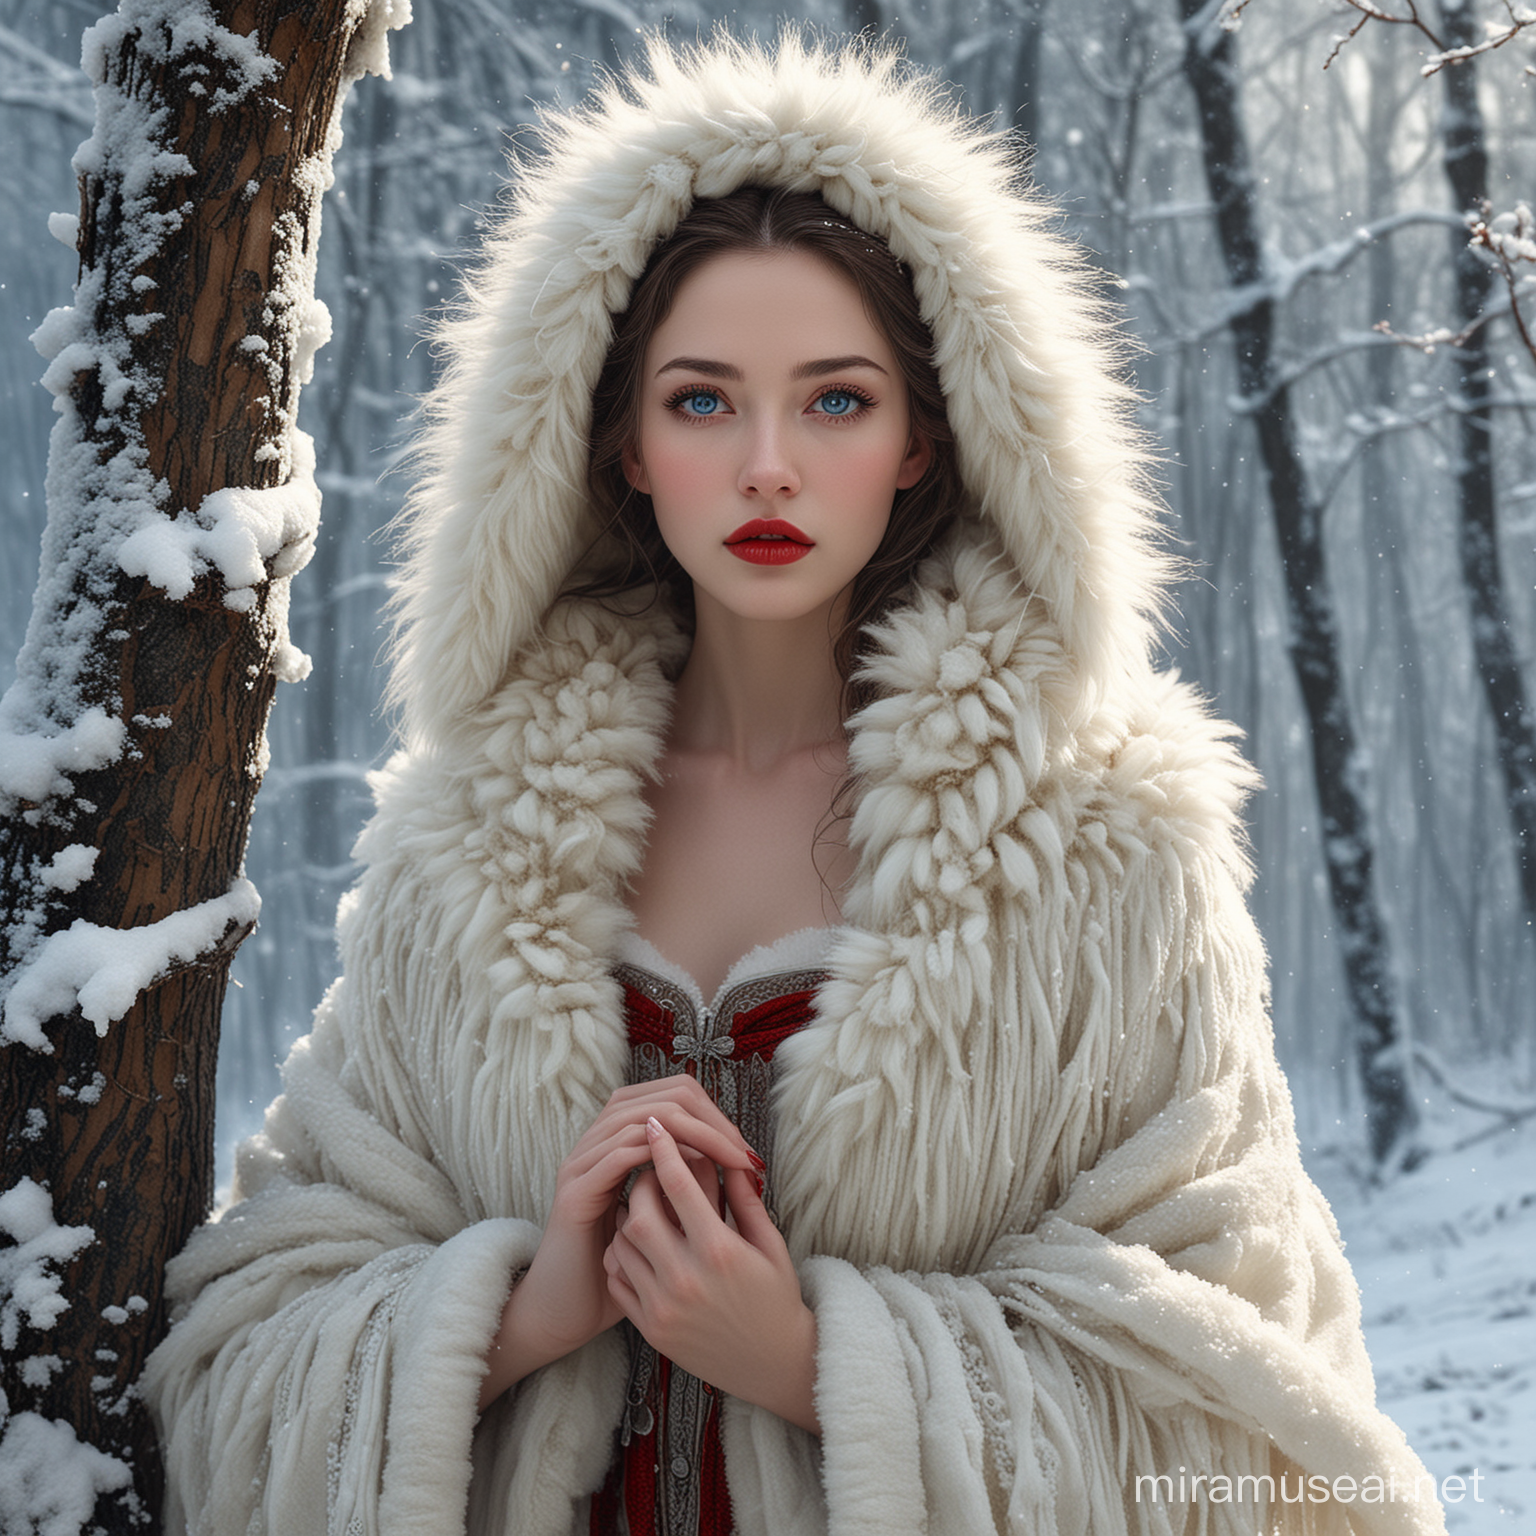 Digital art, Aivision, full body of beautiful young women , blue eyes , full red lips. In shining snow - white ,  long fur clothes . Jim Cheung , arthur rackham , Catrin Welz - Stein , Bill Carman , shining forest around . fairy tale , by very detailed and elaborate . sung choi art , realistic facial features . Realistic hair texture, dark , night